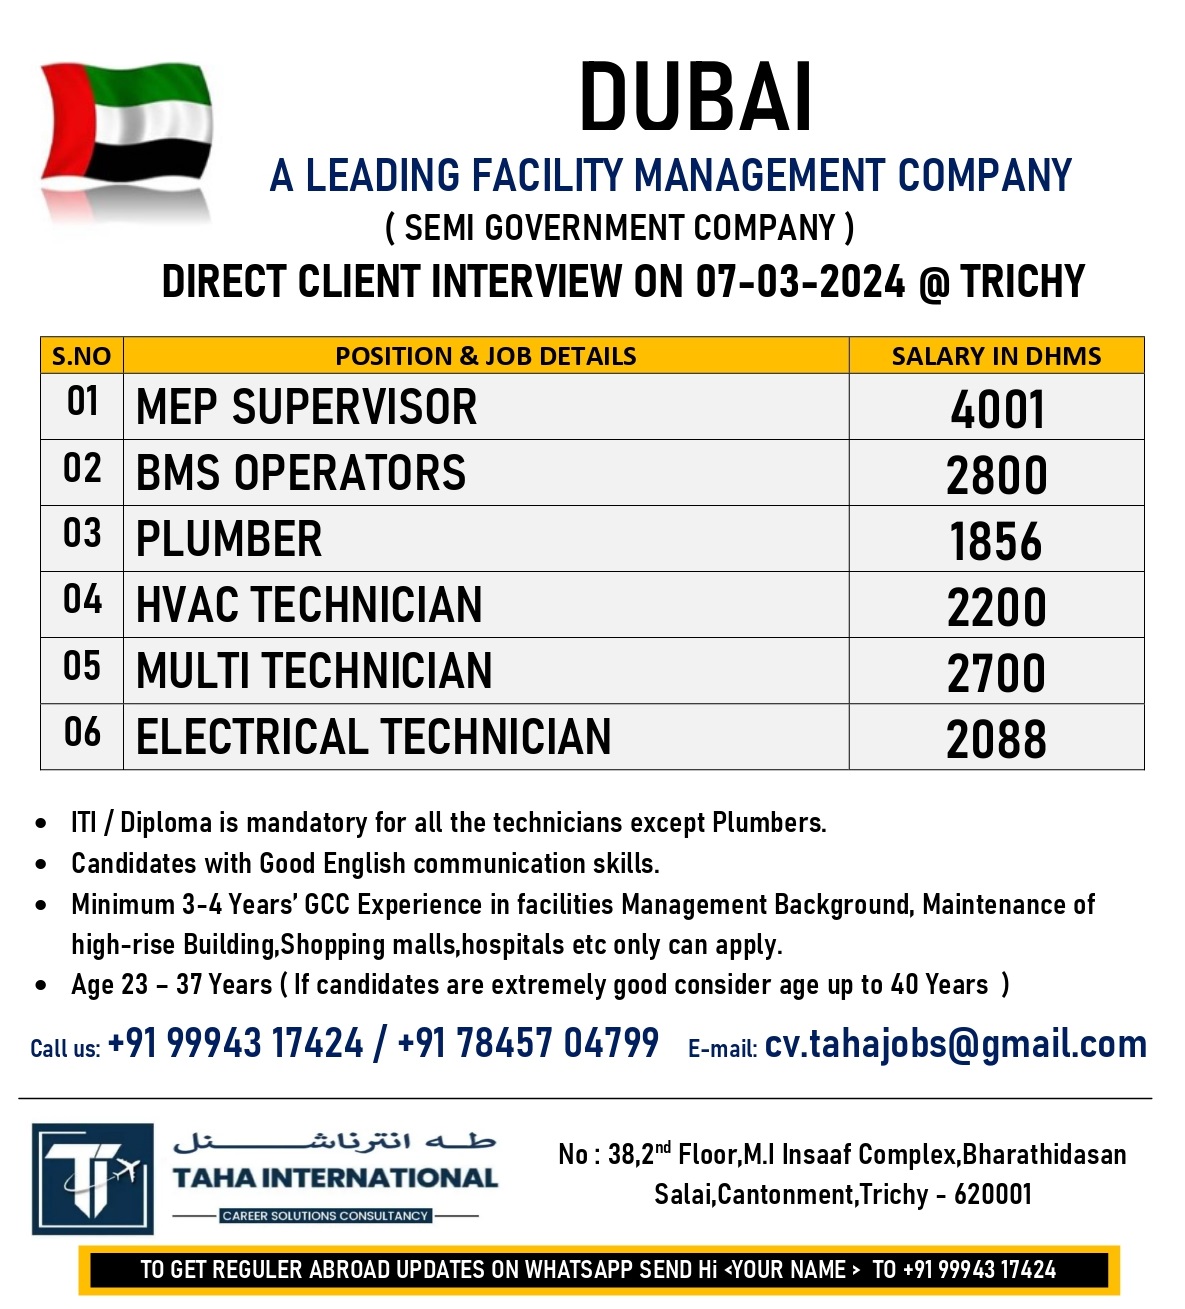 A LEADING FACILITY MANAGEMENT COMPANY IN DUBAI – INTERVIEW ON 7TH MARCH 2024 @ TRICHY